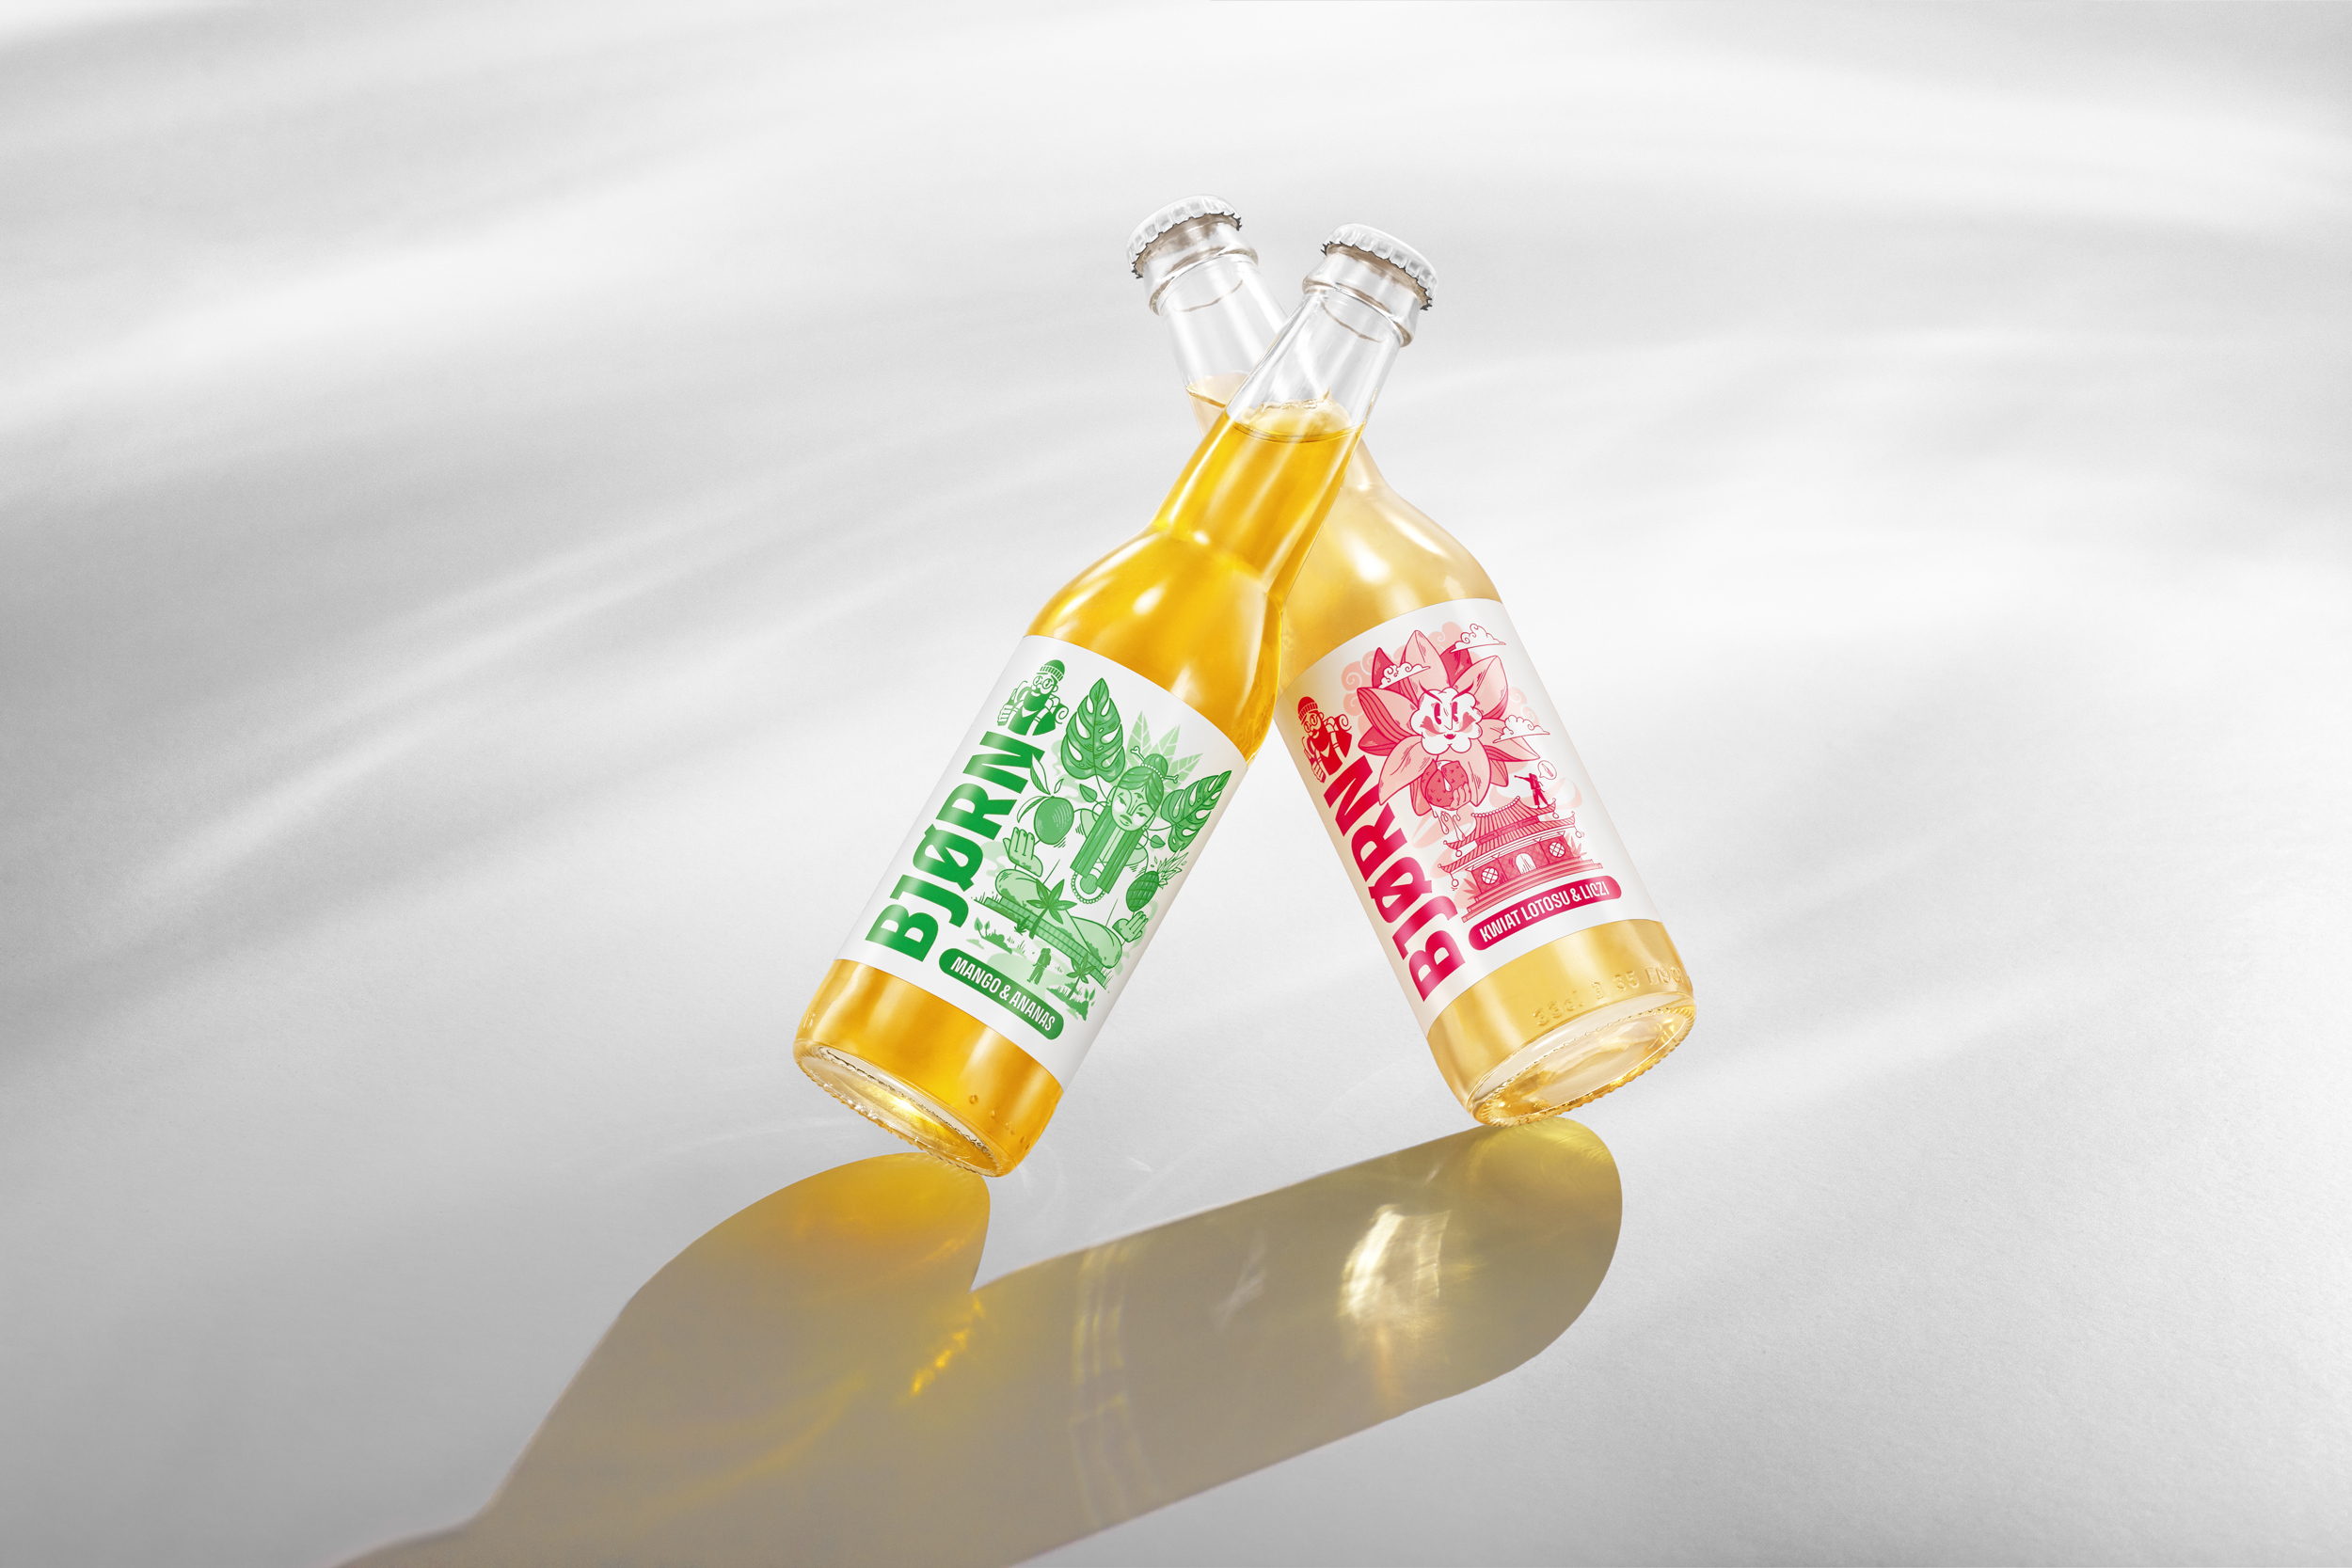 Product photography of soft drinks in bottles.